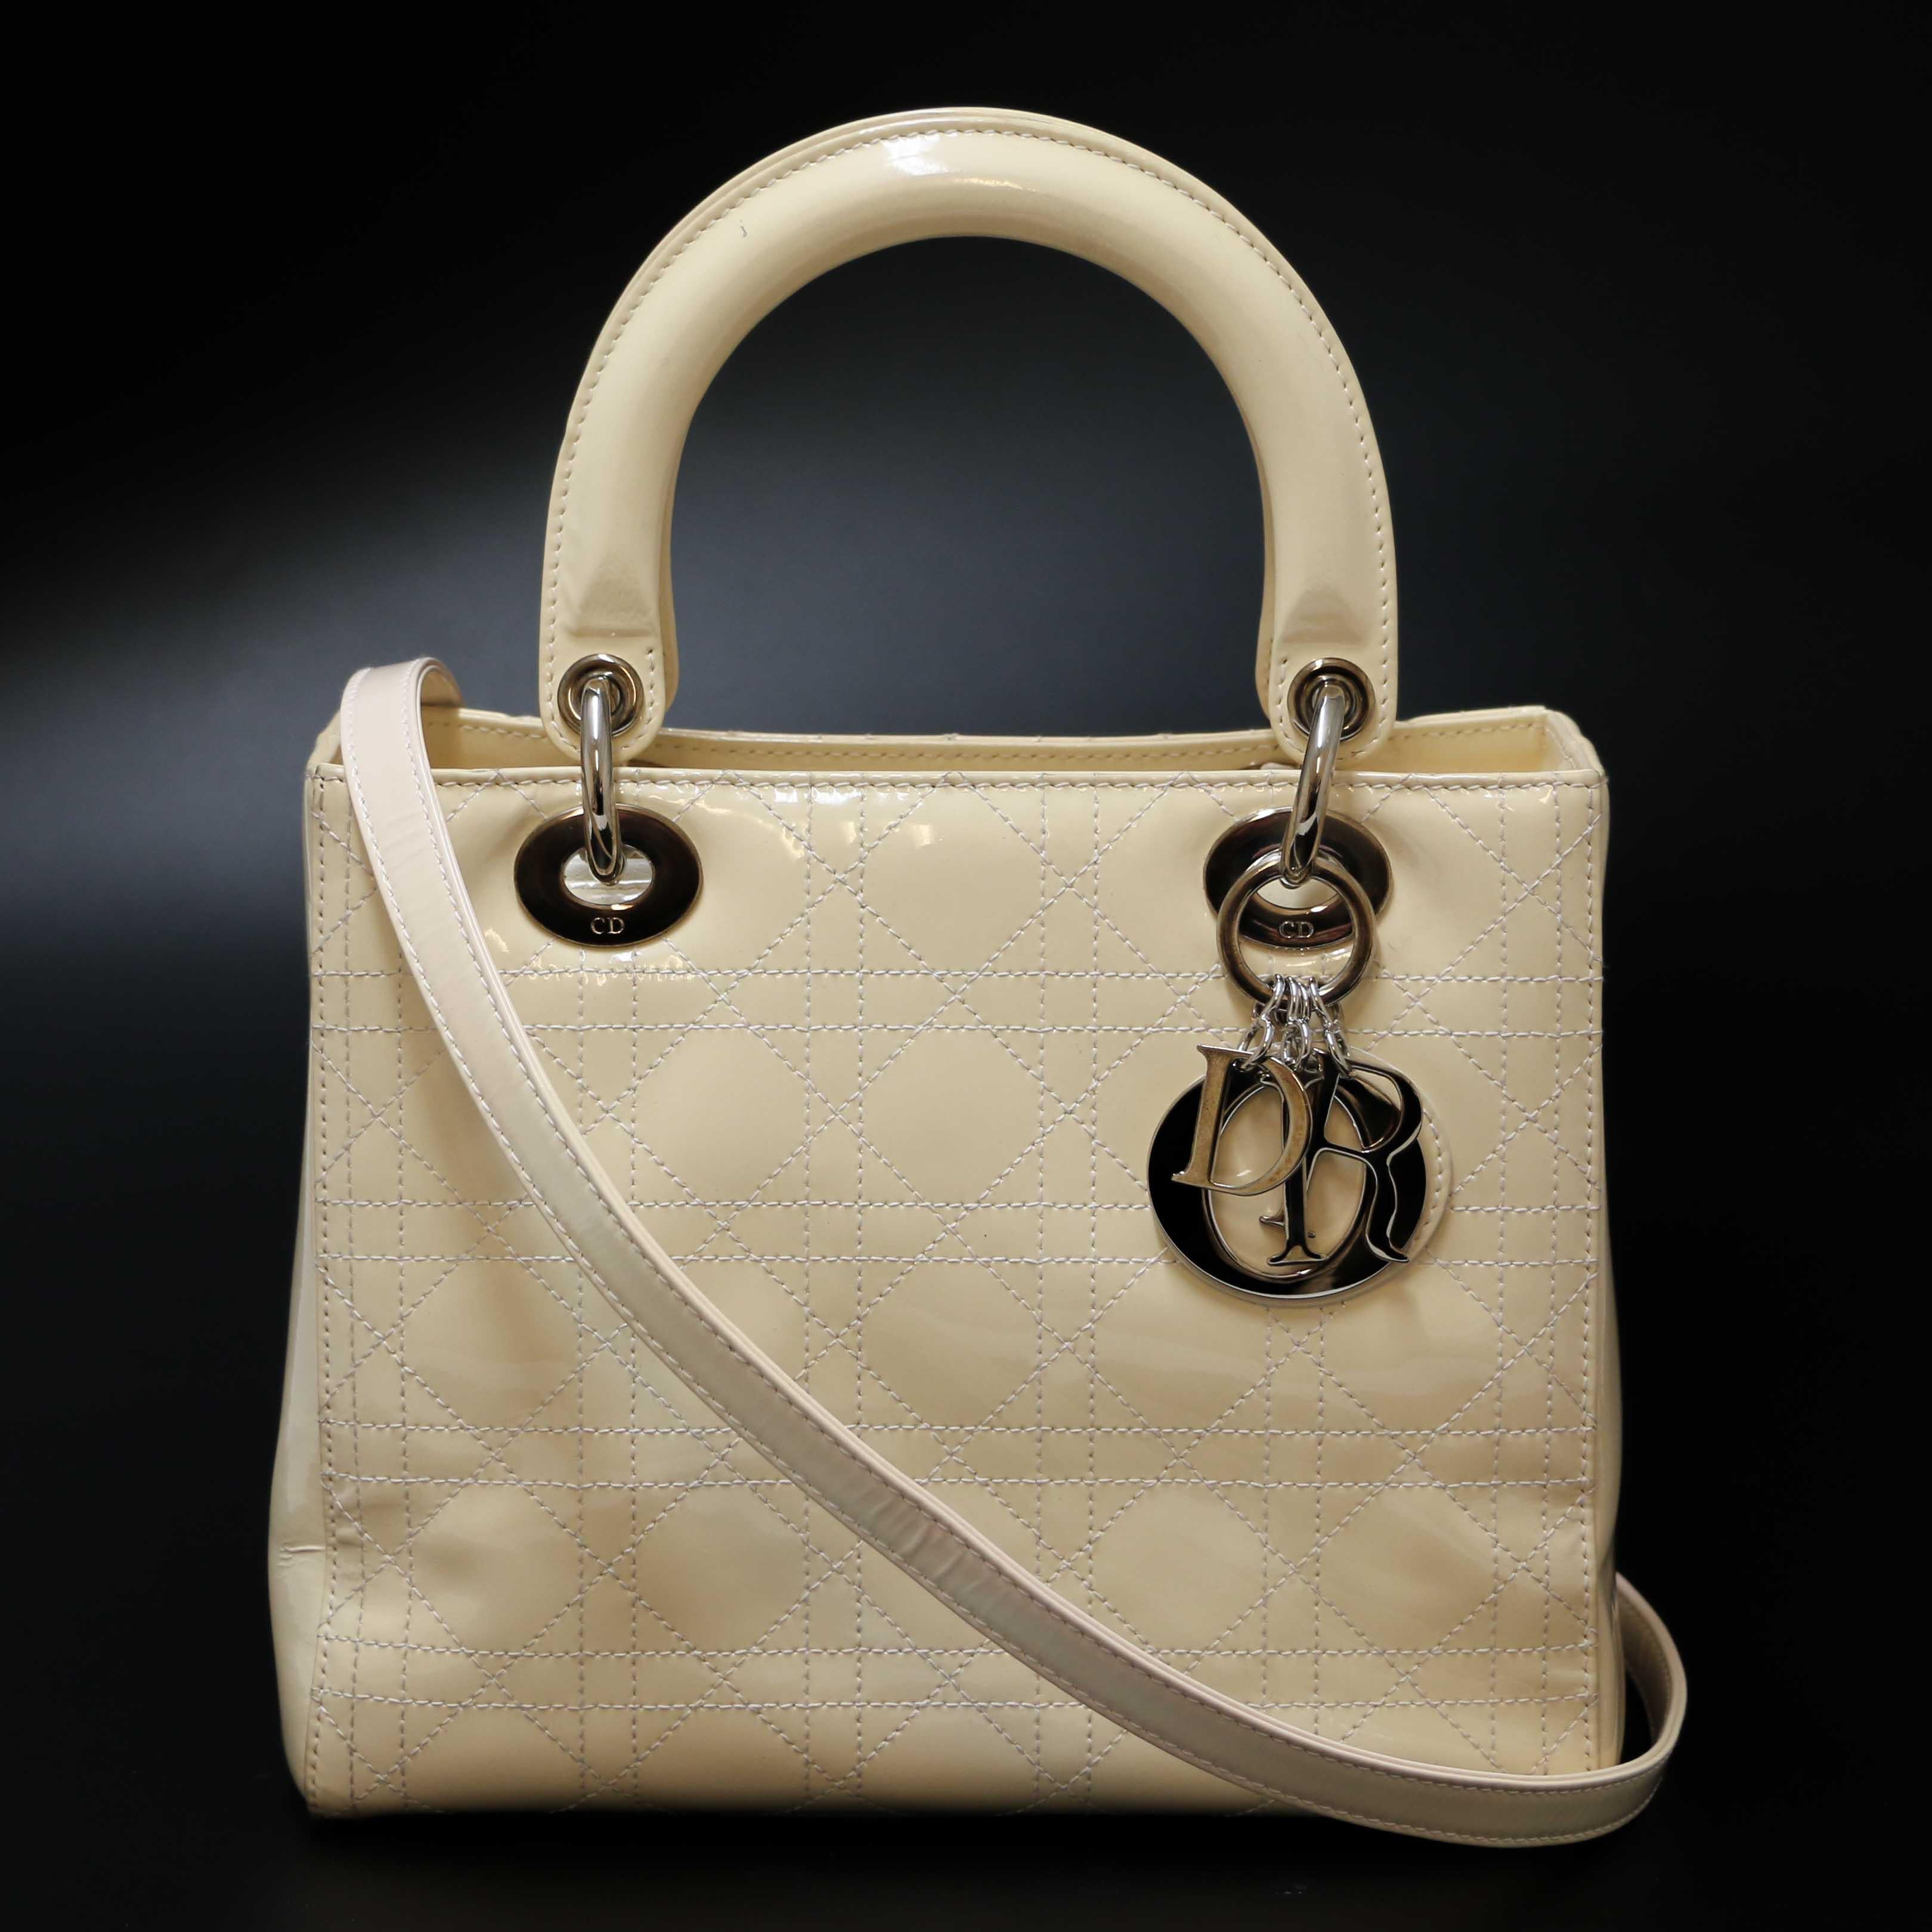 Beautiful Lady Dior bag in off-white patent leather

Condition: very good
Made in Italy
Collection: Lady Dior
Genre: women
Material: patent leather
Interior: black fabric
Color: off-white
Dimensions: 25 x 20 x 12 cm
Strap (removable): 87 cm
Serial